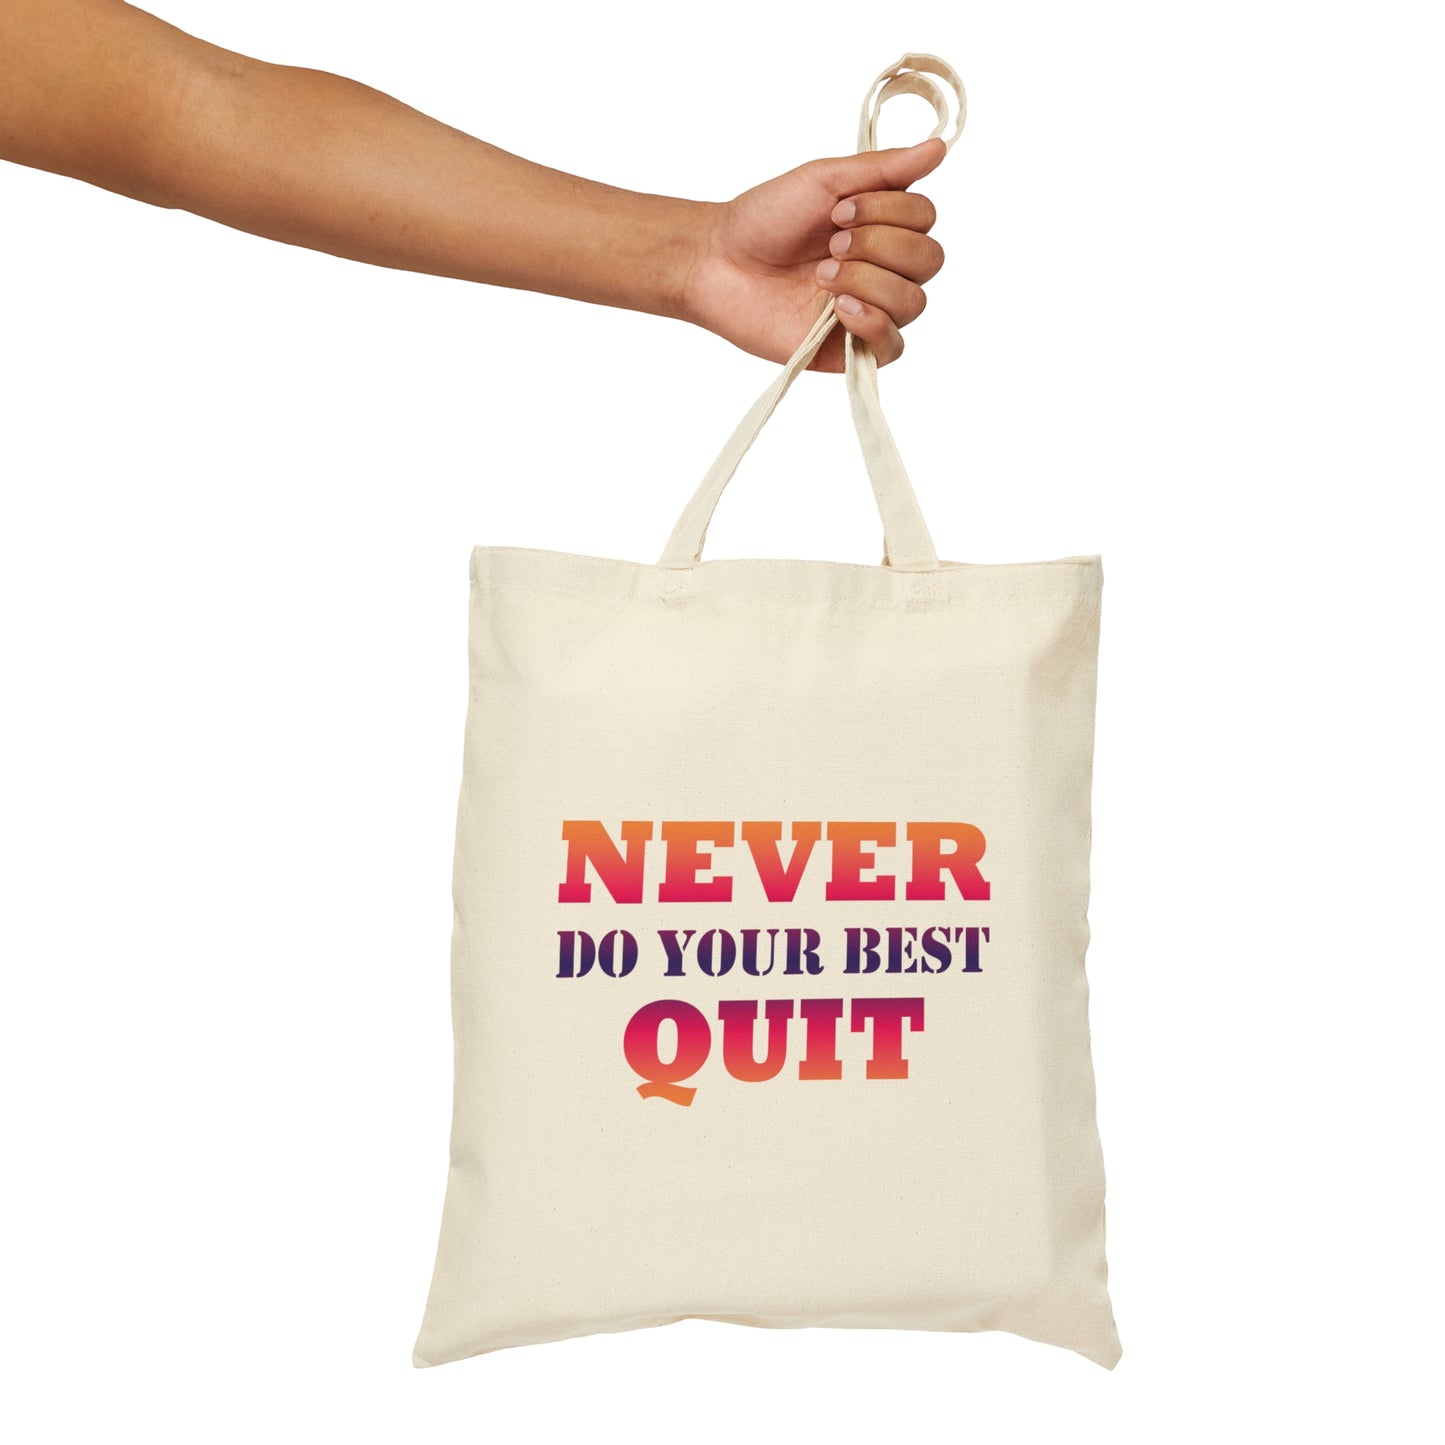 Never Do Your Best Quit Motivation Quotes Canvas Shopping Cotton Tote Bag